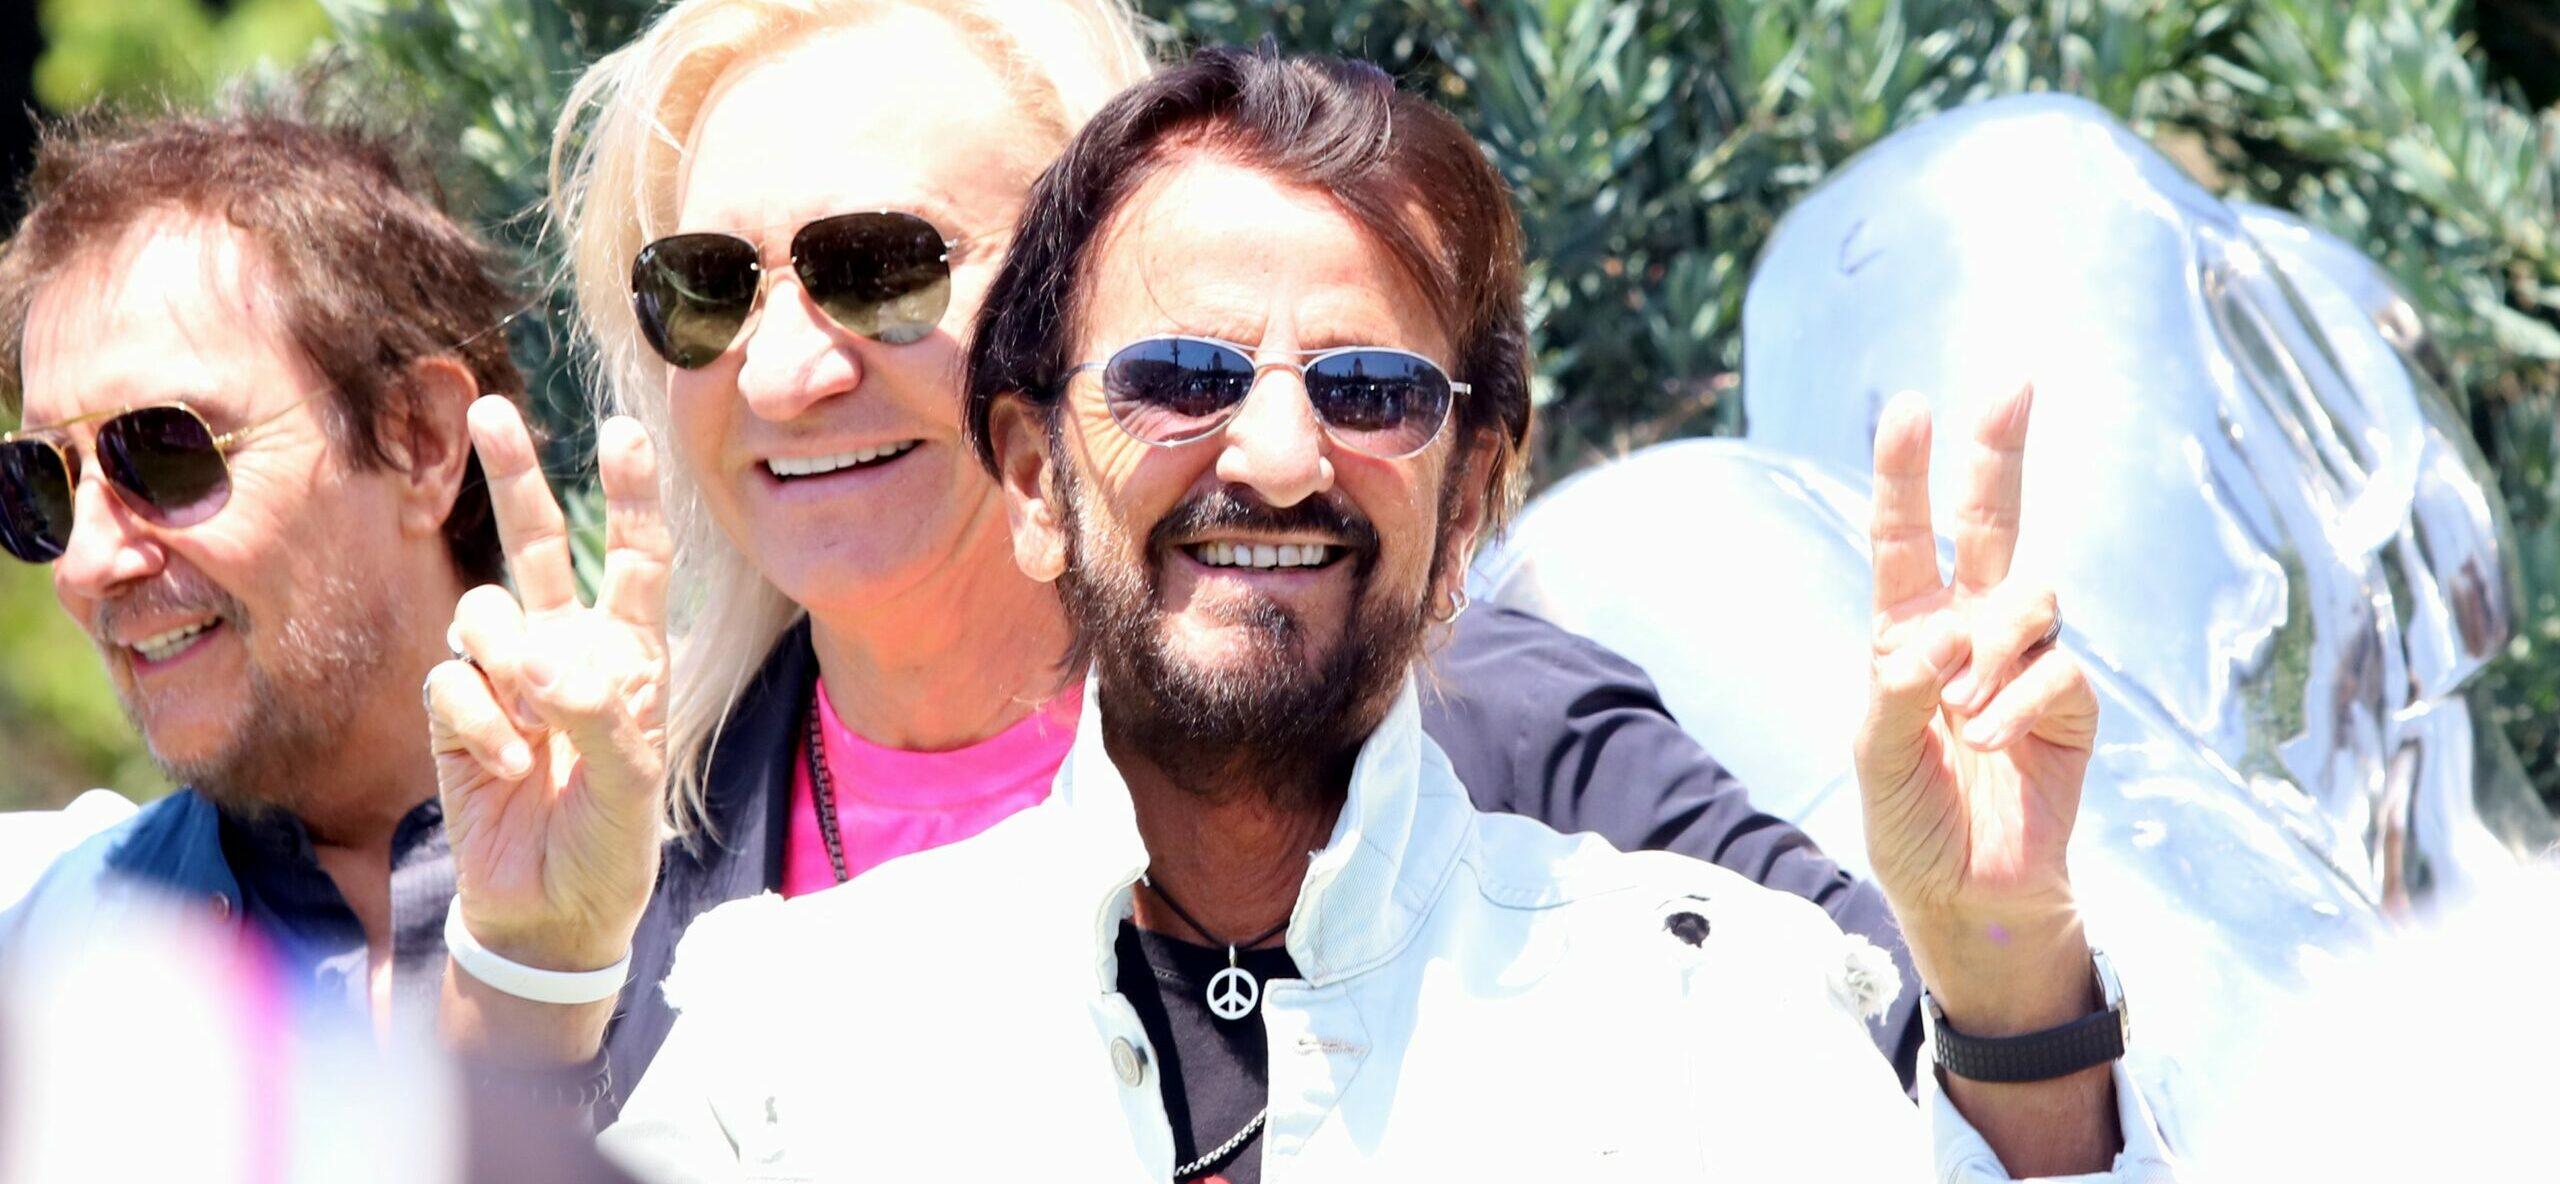 Ringo Starr celebrates his 81st birthday with a gathering and appears for his "Peace and Love" artwork to celebrate